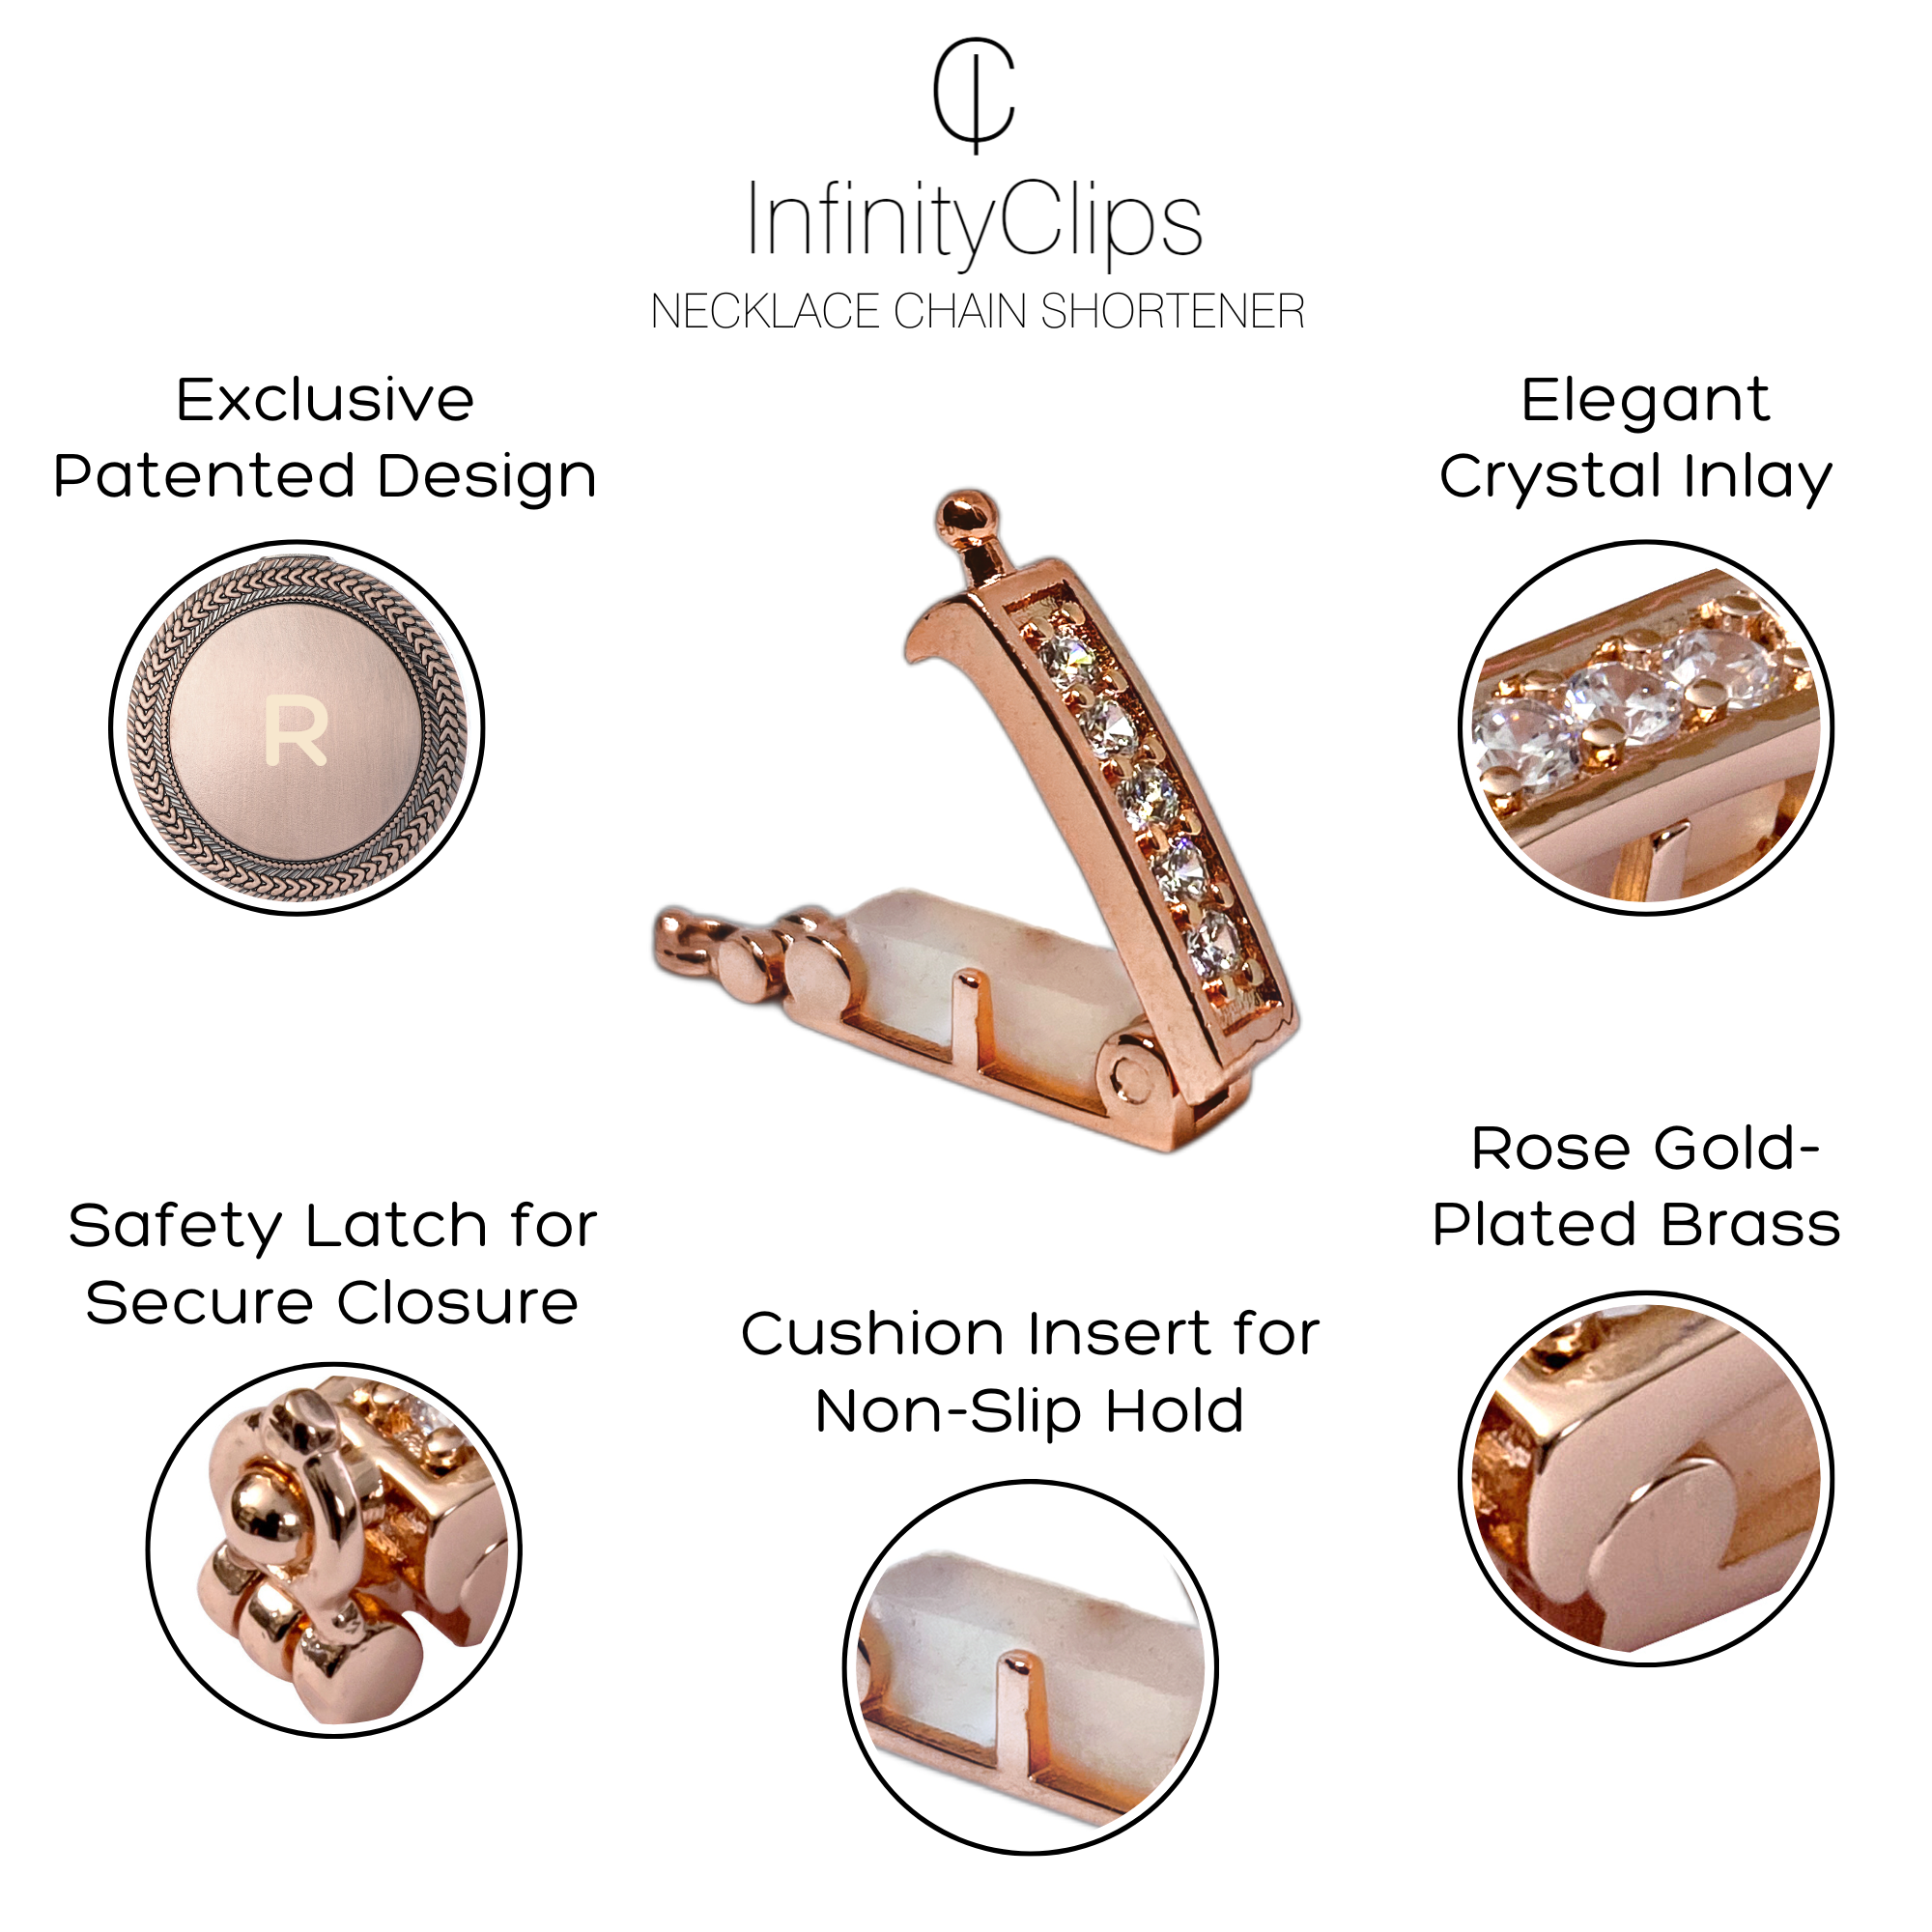 Small Classic Necklace Shortener | InfinityClips Gold